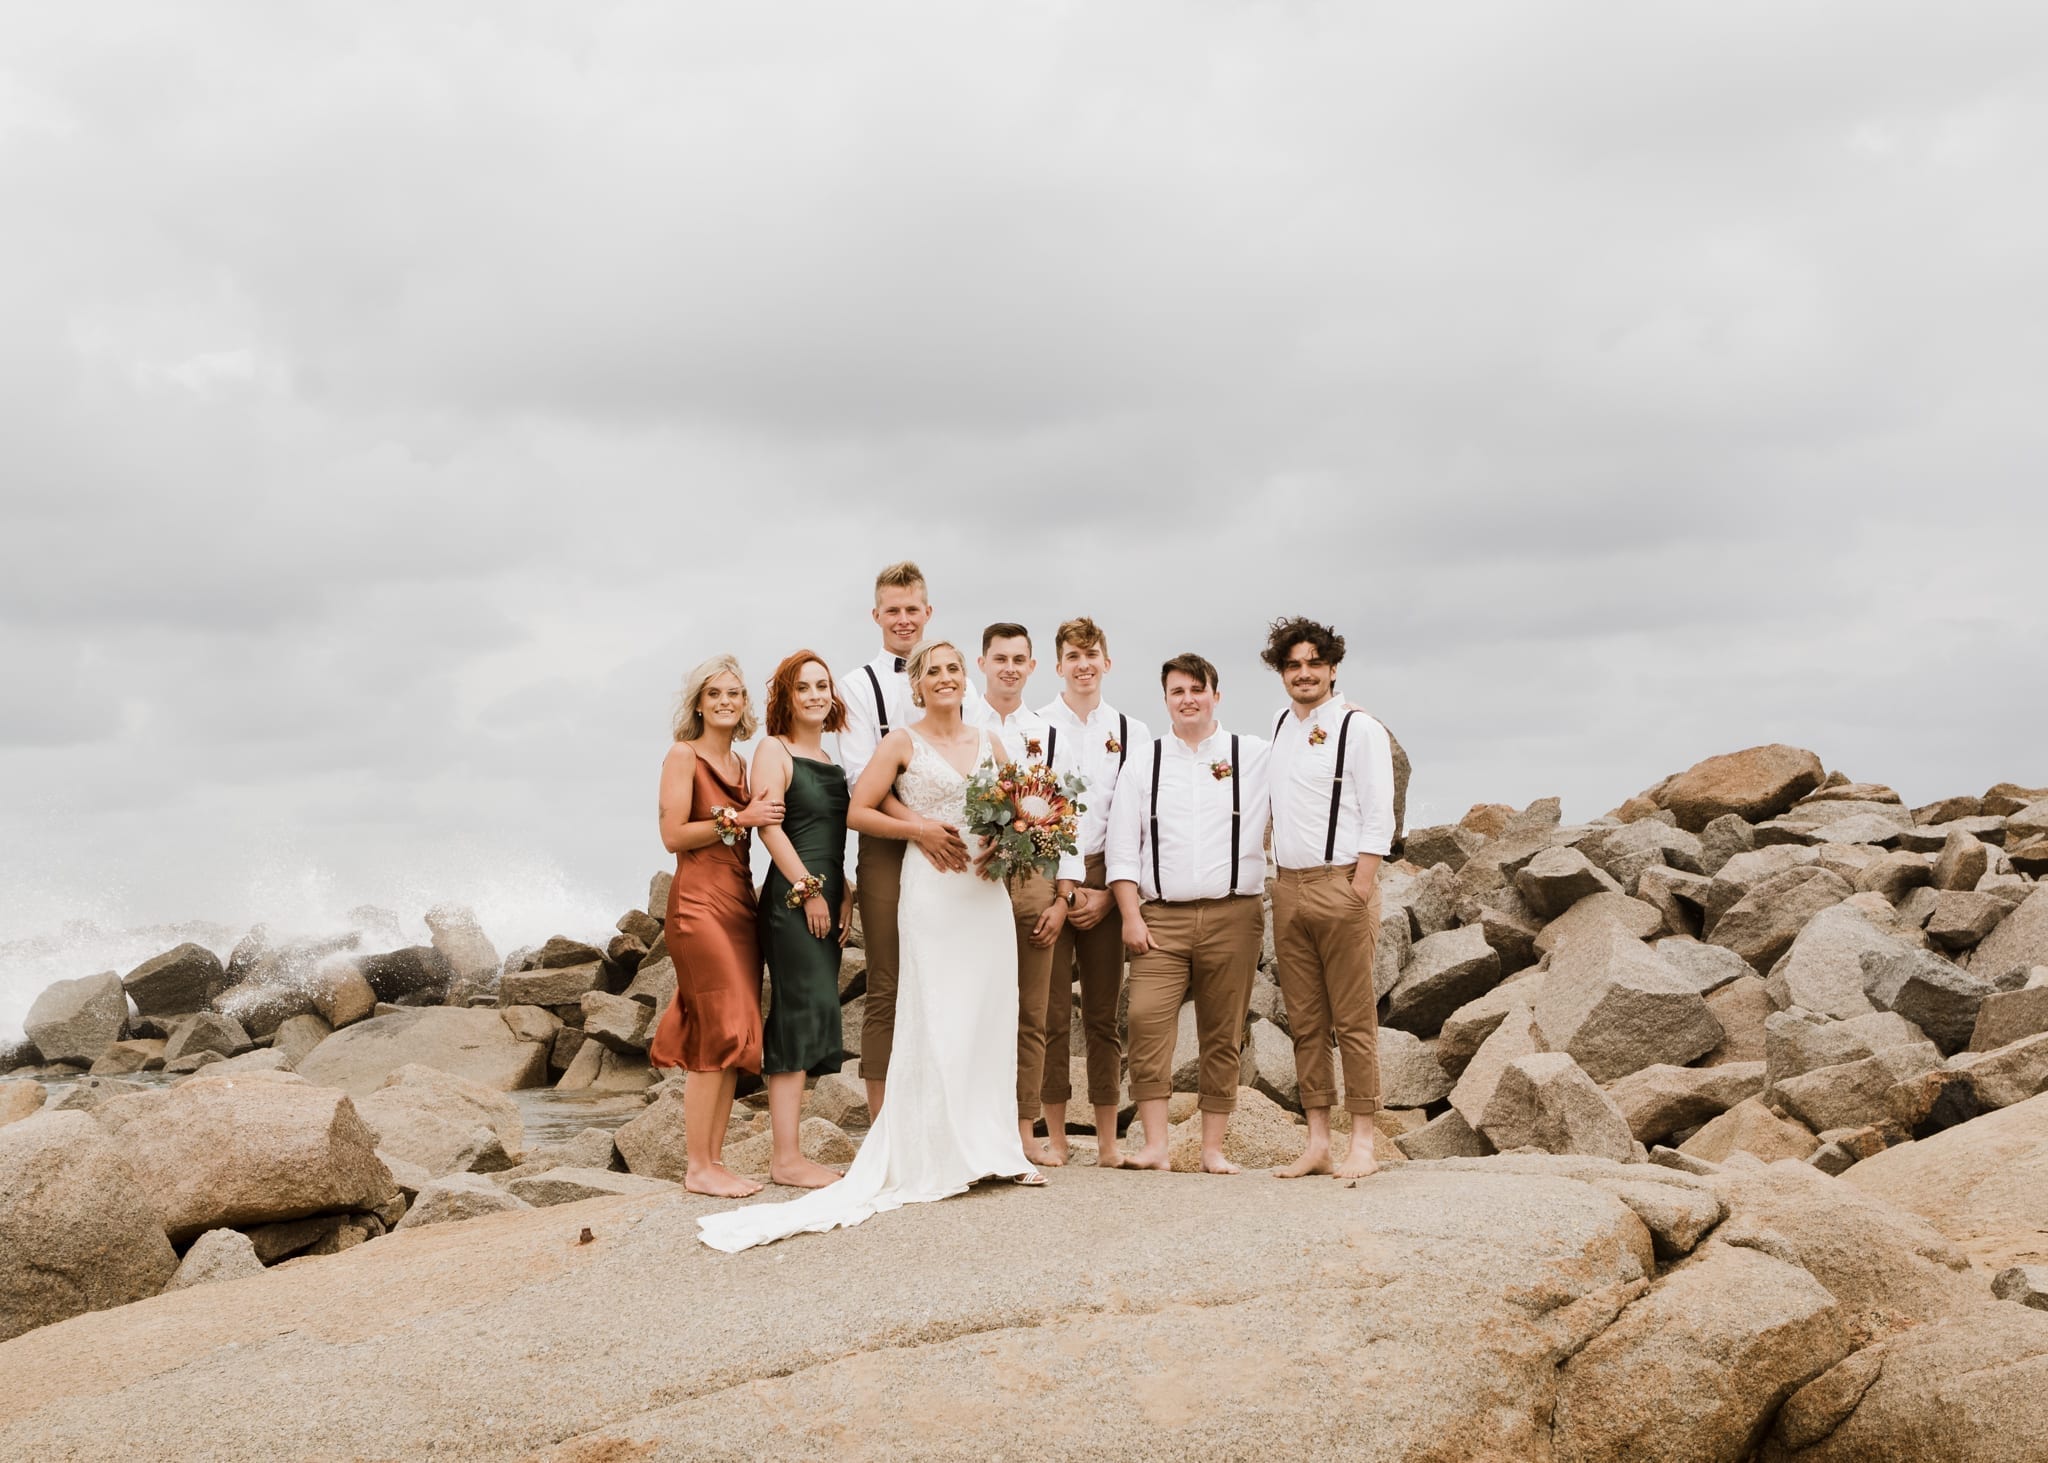 The wedding party at Ladies Beach